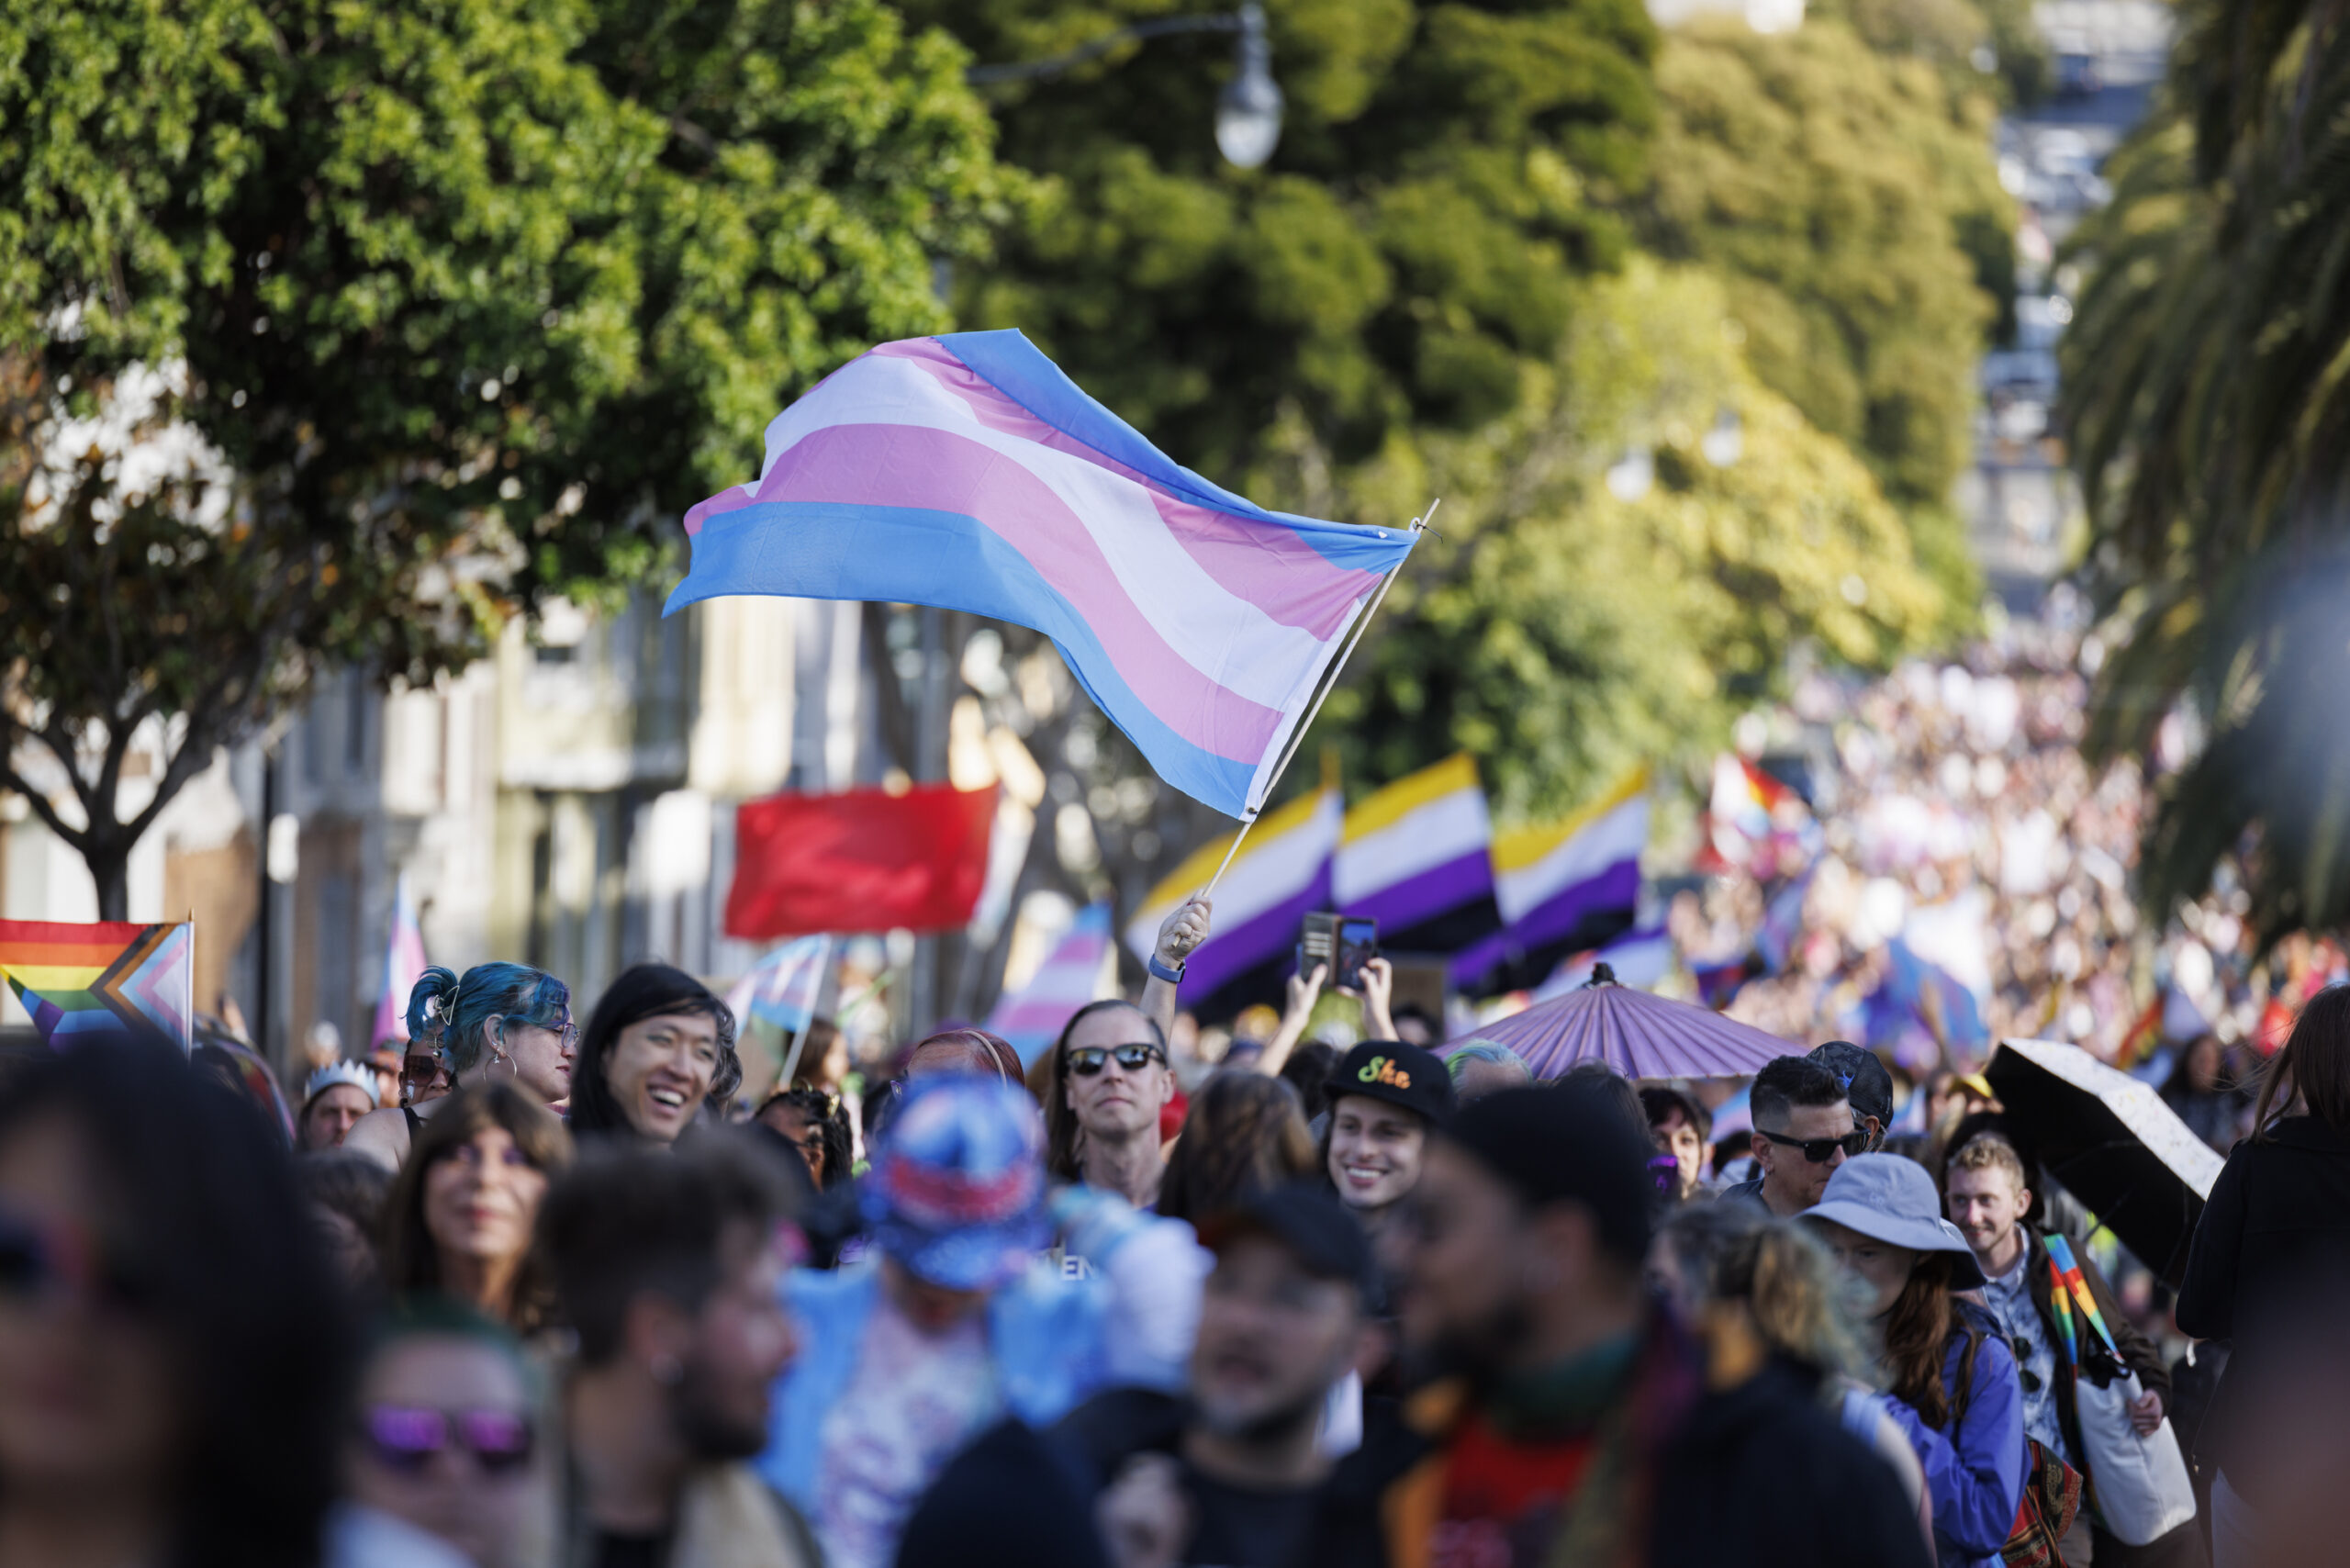 A crowded street with people carrying the trans flag and other colorful flags in a festive atmosphere.